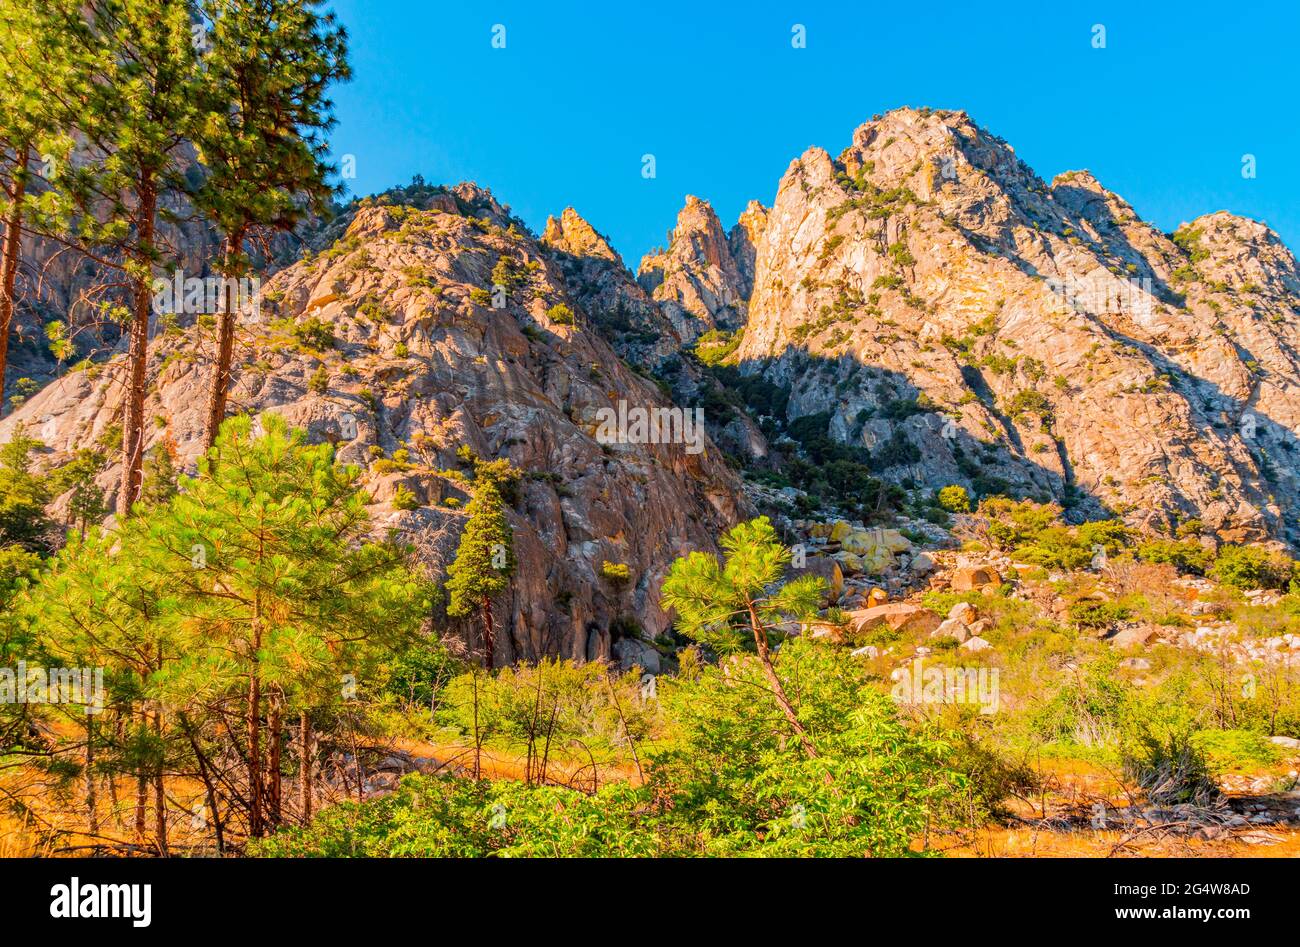 Dramatic mountains jut up to the sky in jagged shapes with pine trees and lush foliage growing in the meadow below in King's Canyon National Park Stock Photo